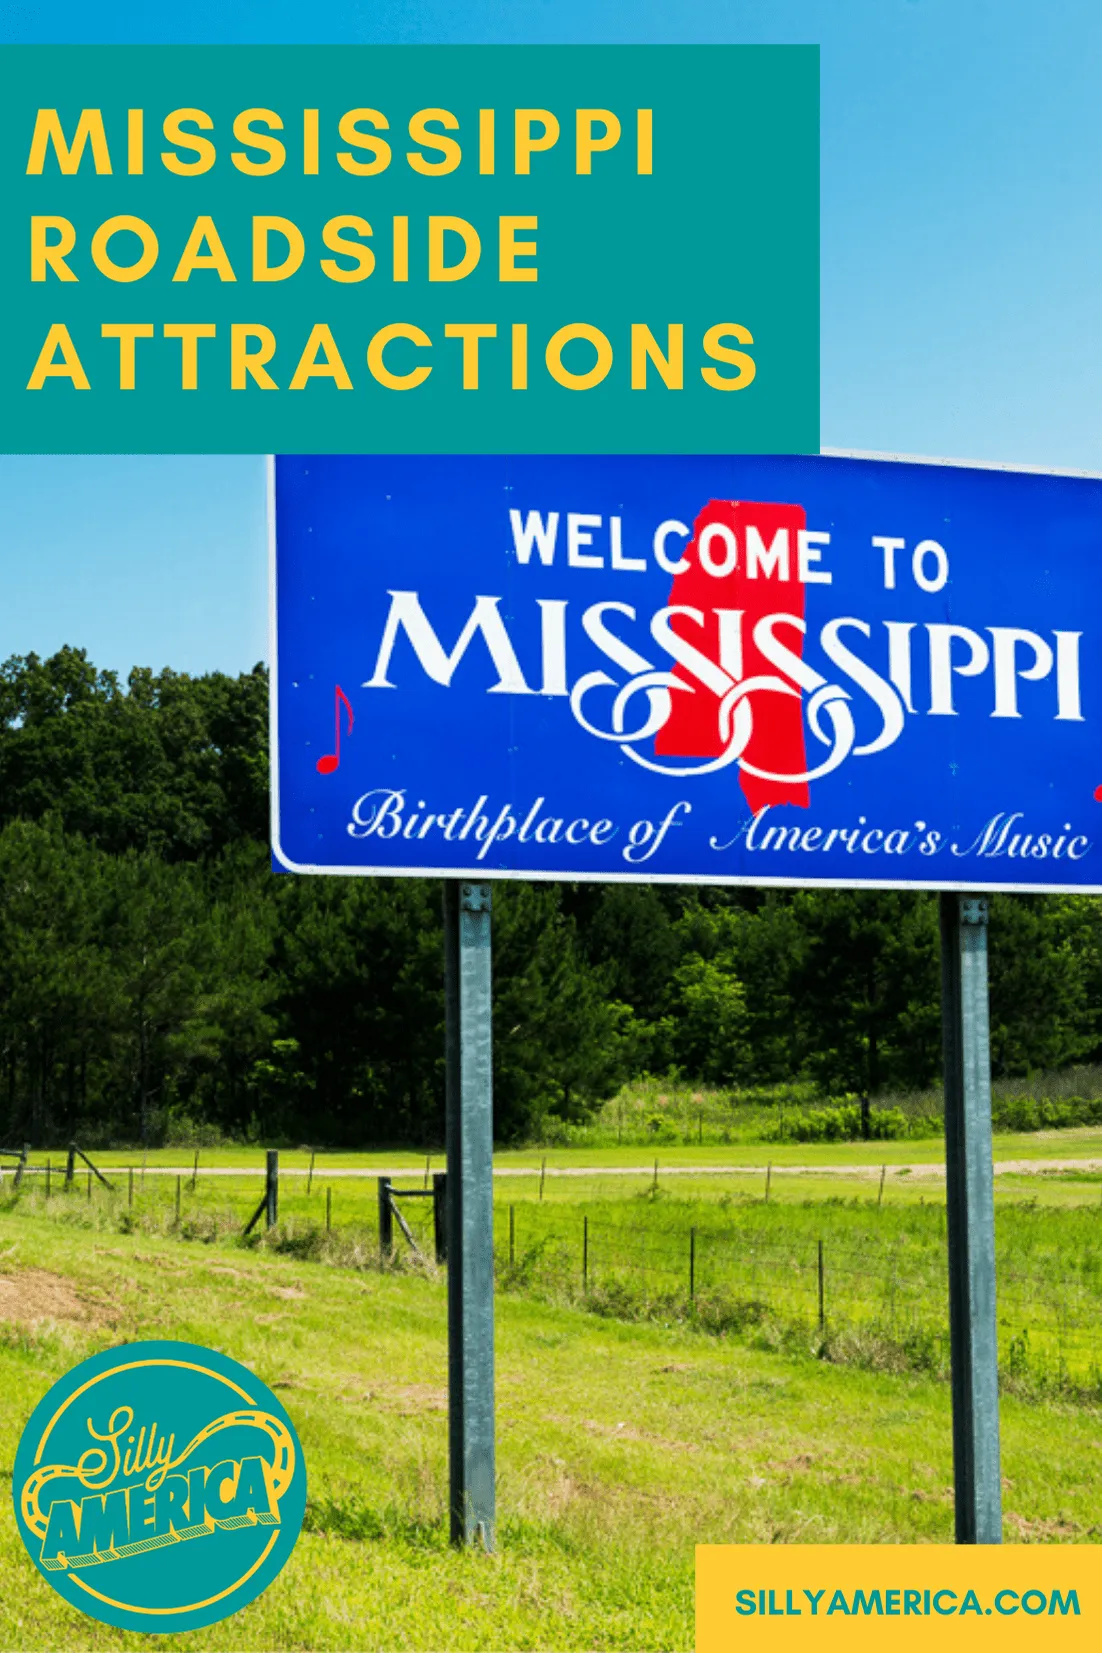 The best Mississippi roadside attractions to visit on a Mississippi road trip. Add these roadside oddities to your travel bucket list, itinerary, or map! Weird roadside attractions and road trip stops for kids and adults on the Great River Road and beyond. #MississippiRoadsideAttractions #MississippiRoadsideAttraction #RoadsideAttractions #RoadsideAttraction #RoadTrip #MississippiRoadTrip #MississippiRoadTripBucketLists #MississippiBucketList #MississippiRiverRoadTrip #MississippiTravel